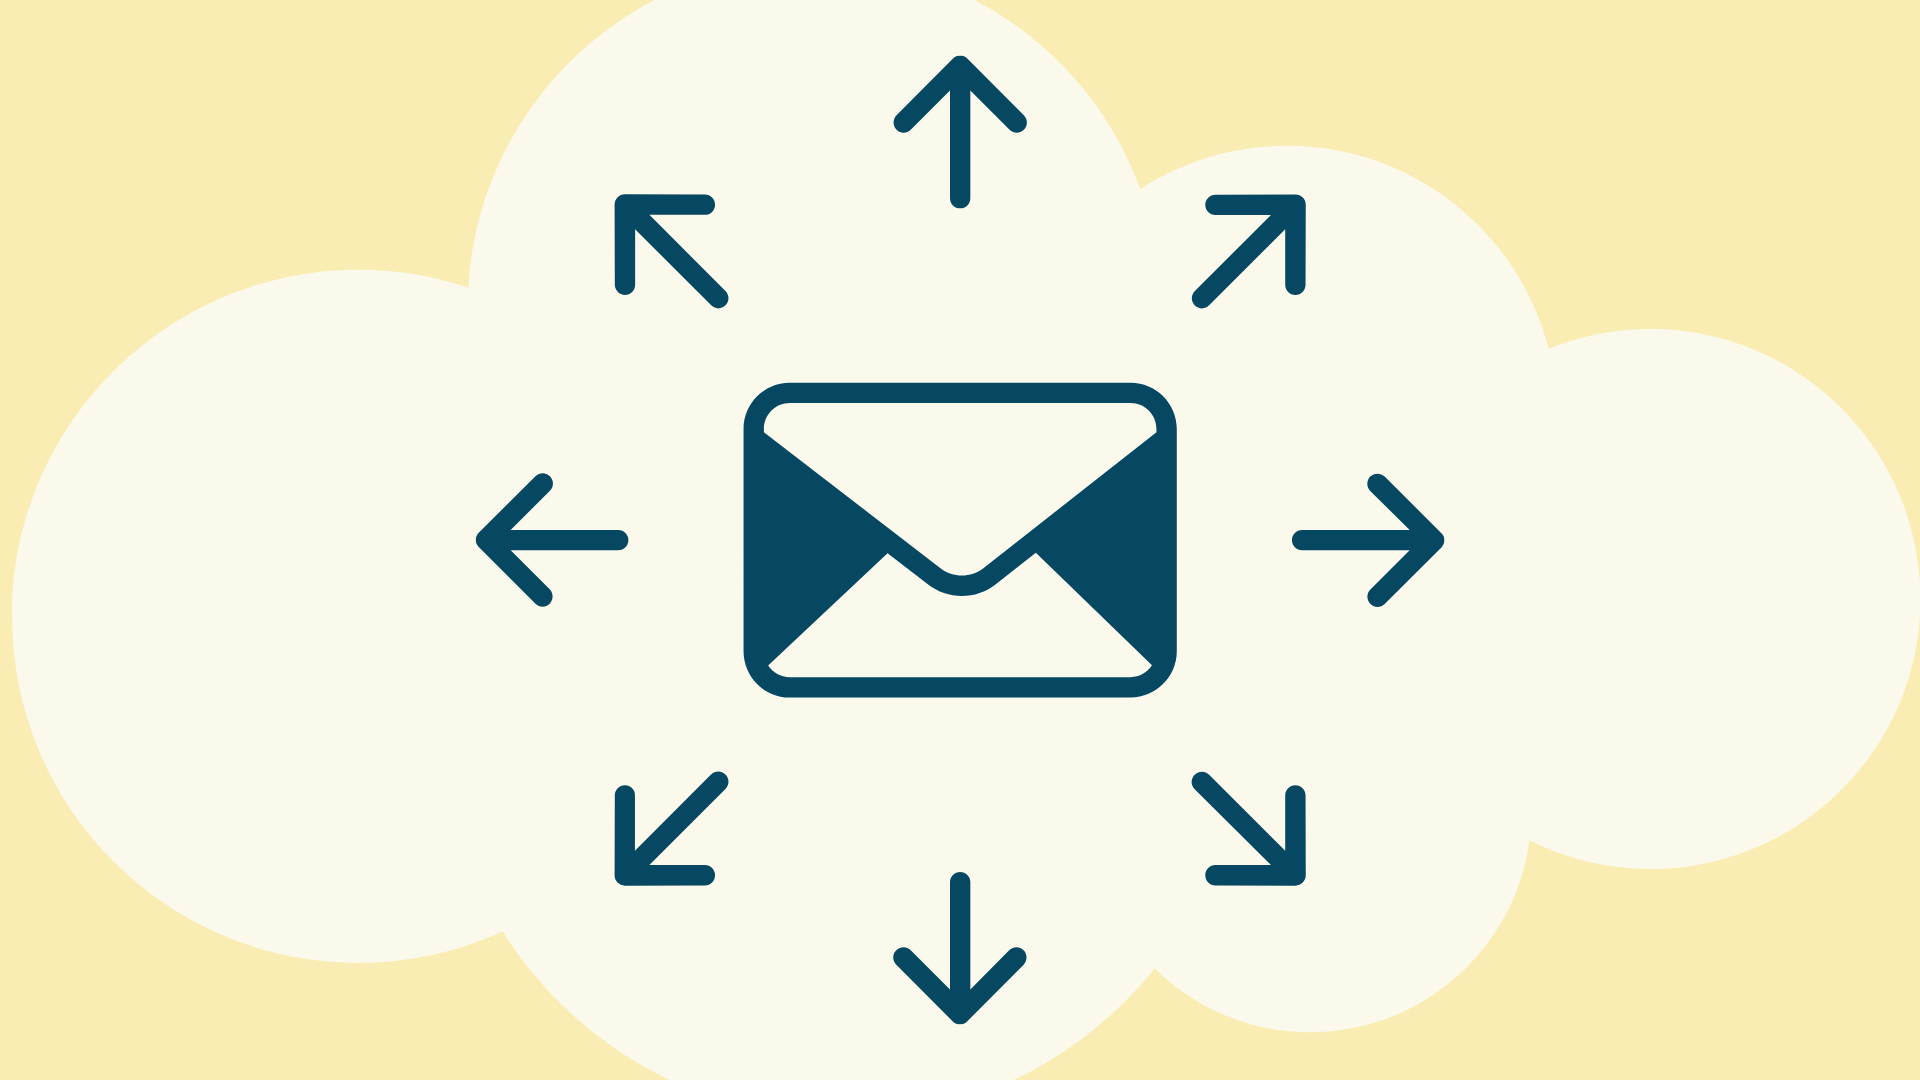 This image shows a stylized graphic of an envelope surrounded by arrows. It is intended to visualize the sending of bulk emails. 